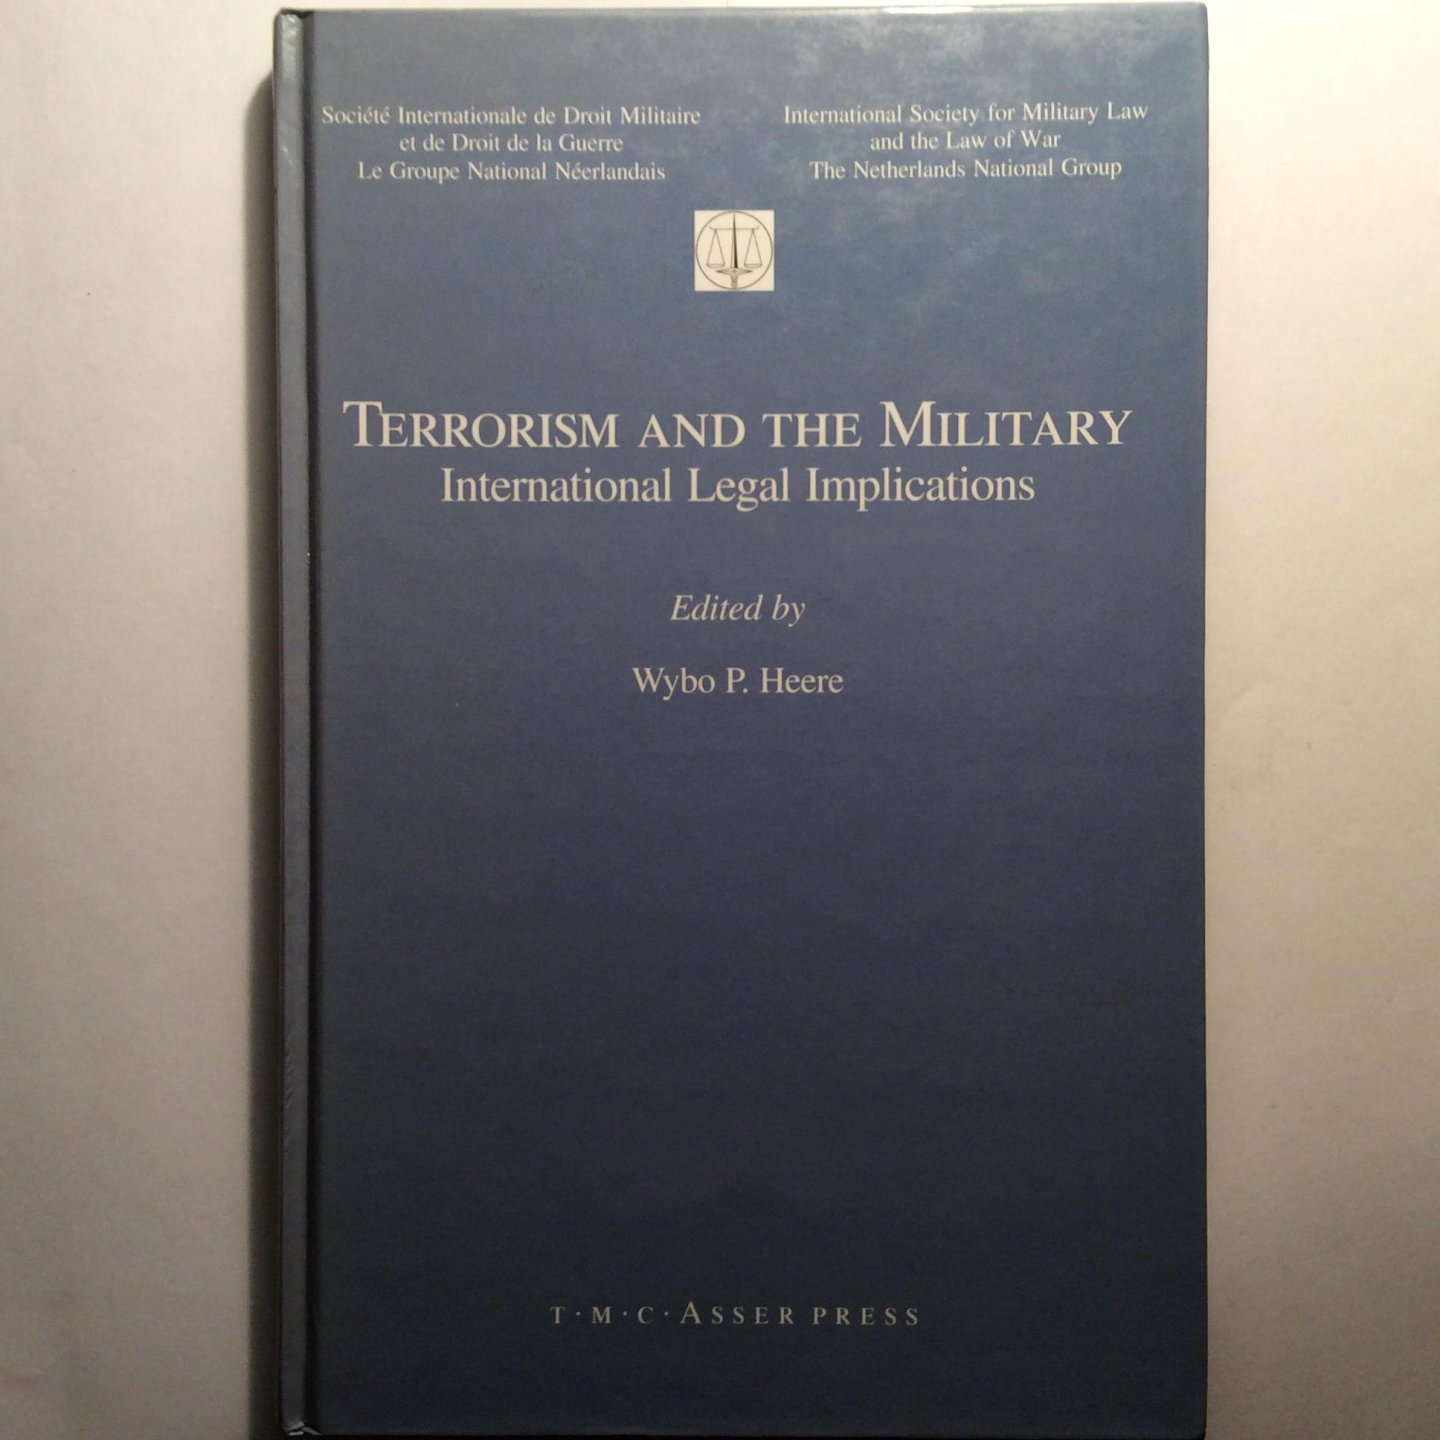 Heere, Wybo P. - Terrorism and the Military. International Legal Implications